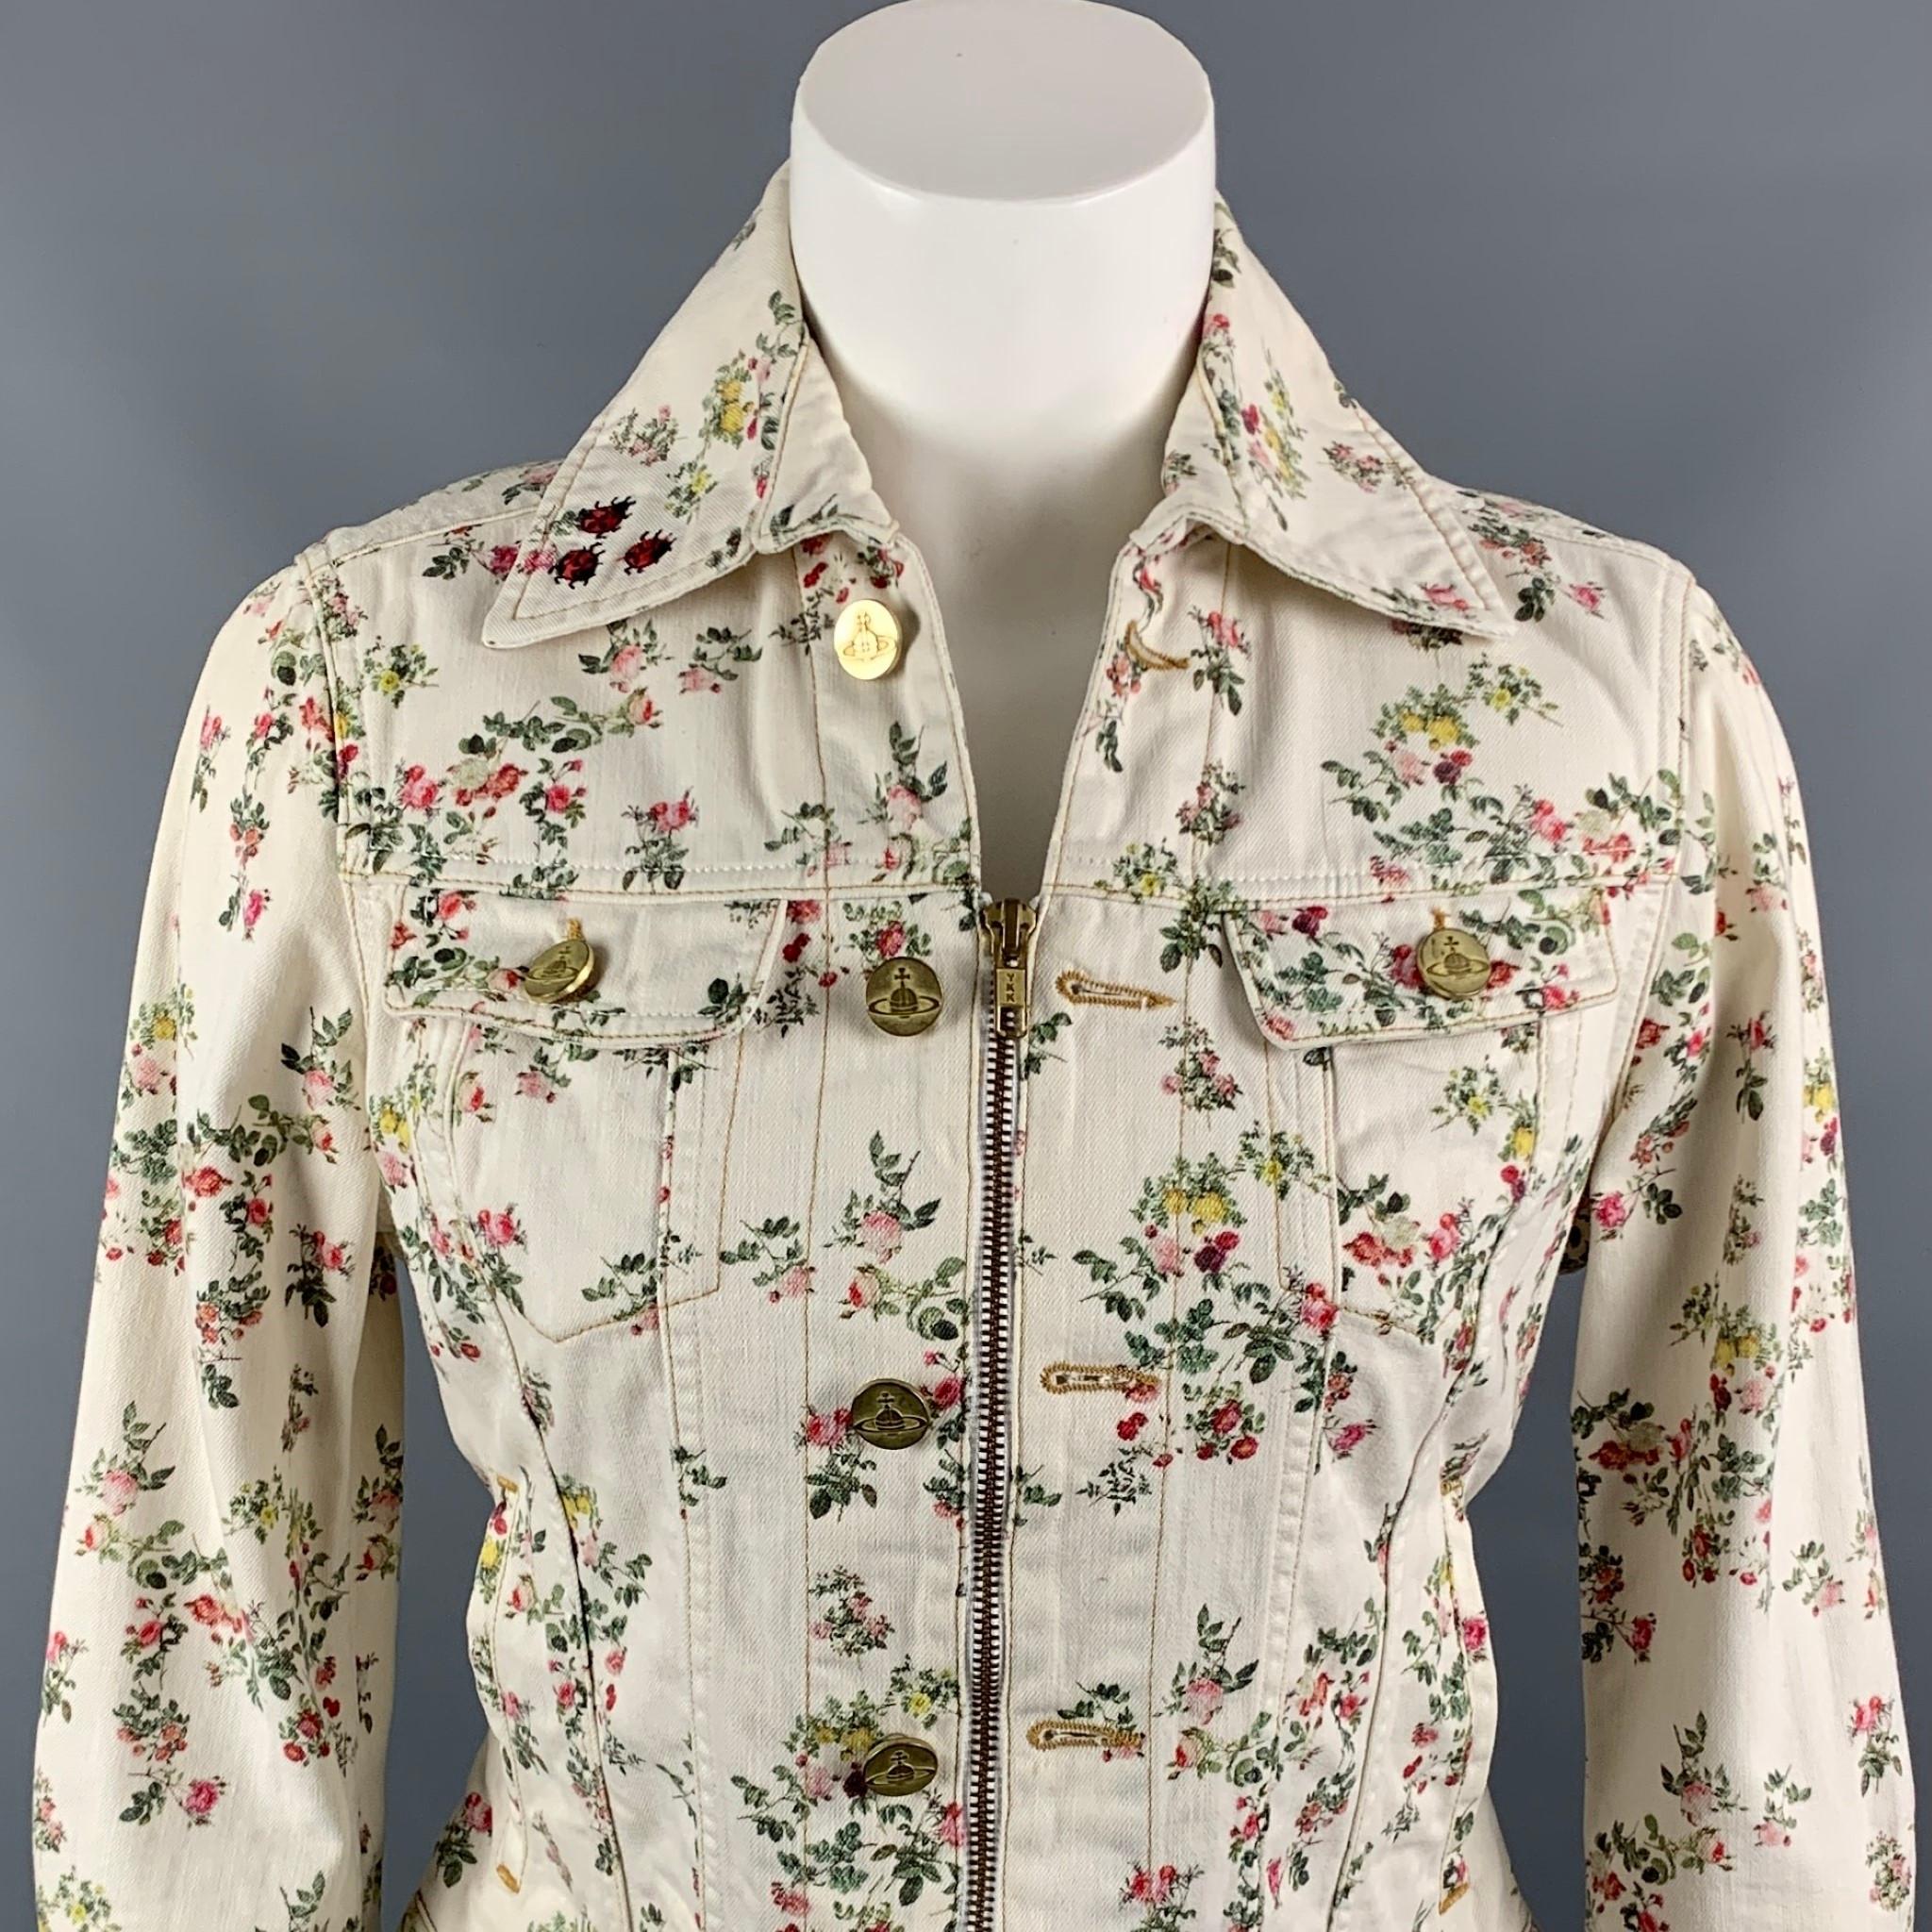 VIVIENNE WESTWOOD ANGLOMANIA x LEE jacket comes in a multi-color floral cotton featuring a trucker style, contrast stitching, gold tone button details, spread collar, and a full zip up closure.

Very Good Pre-Owned Condition.
Marked: